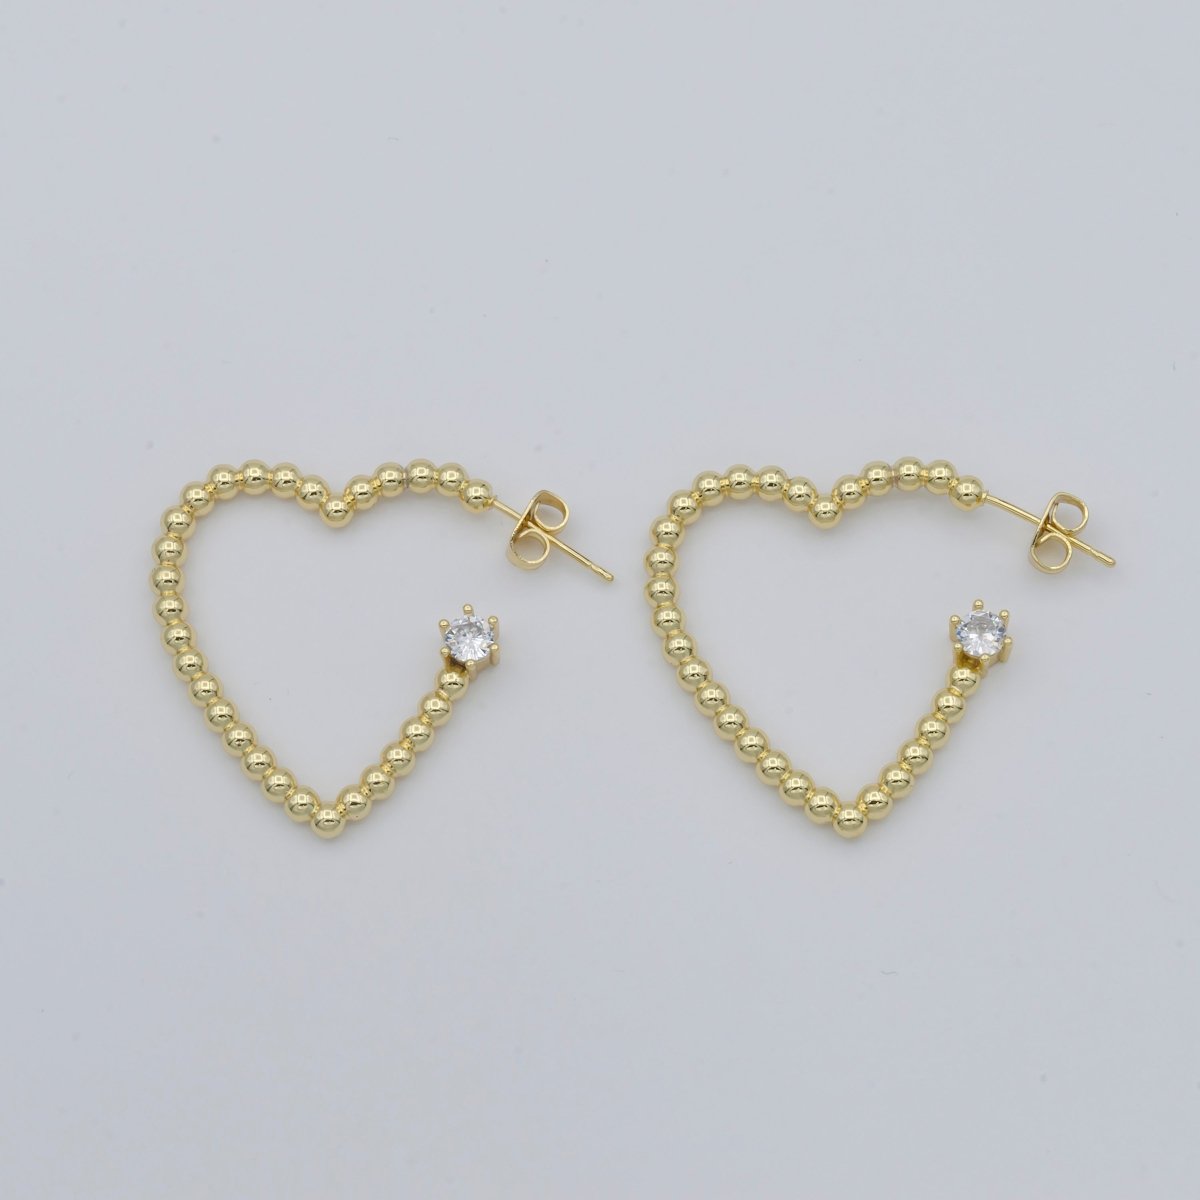 OS 1pair Golden Dotted Heart with Single Crystal Huggies Earrings CZ Gold Filled Tiny Love Heart Shape Casual Daily Wear Earring Jewelry V-043 - DLUXCA